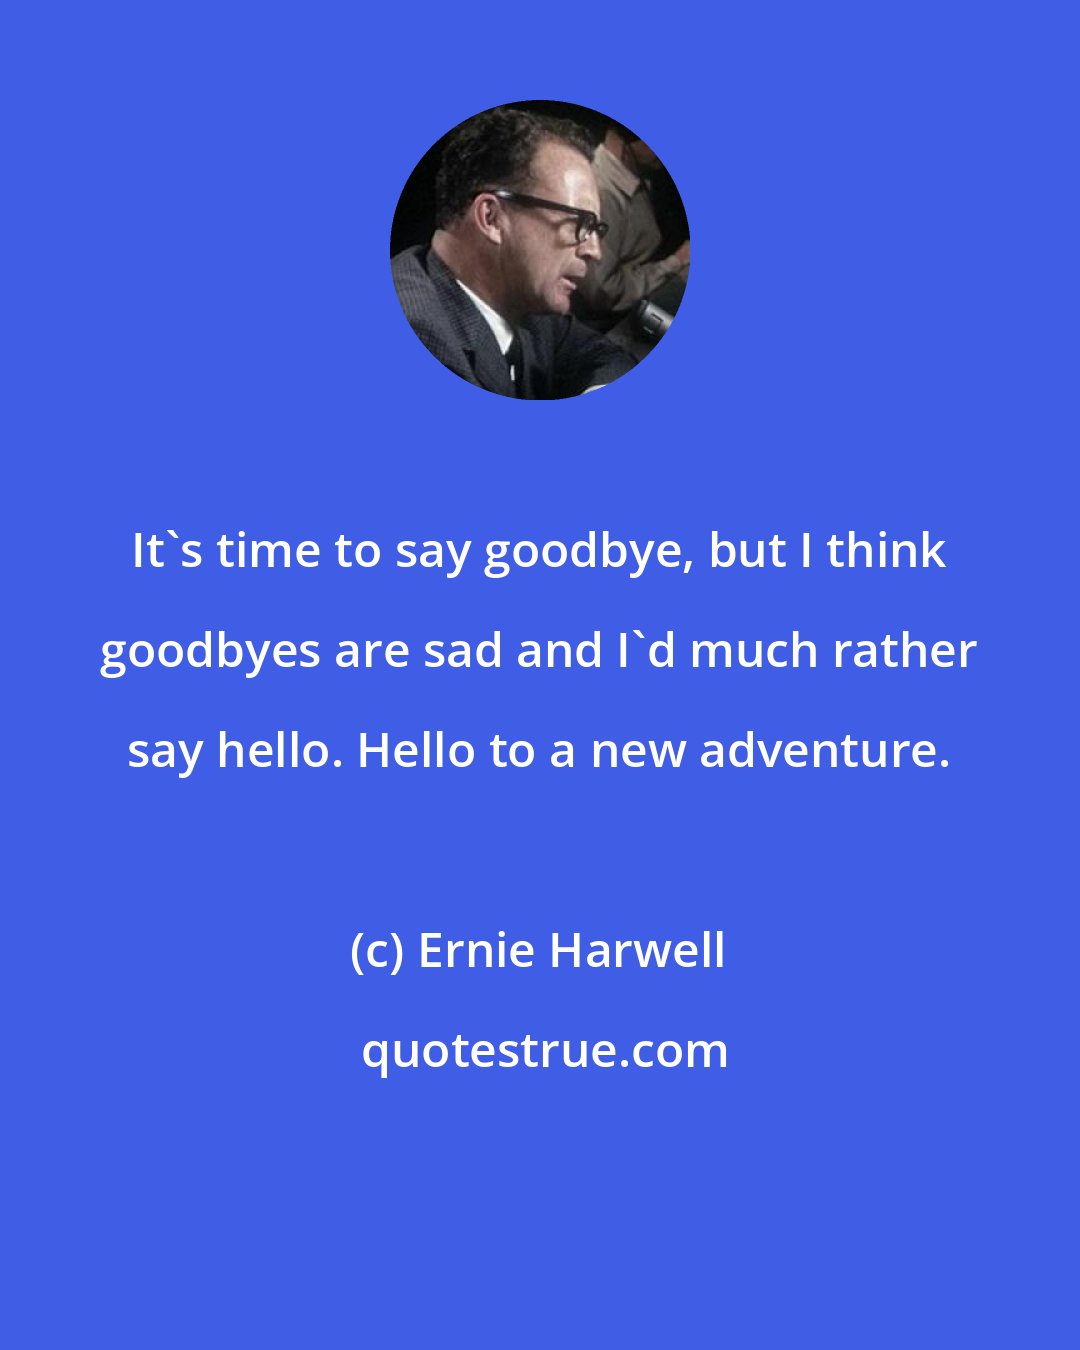 Ernie Harwell: It's time to say goodbye, but I think goodbyes are sad and I'd much rather say hello. Hello to a new adventure.